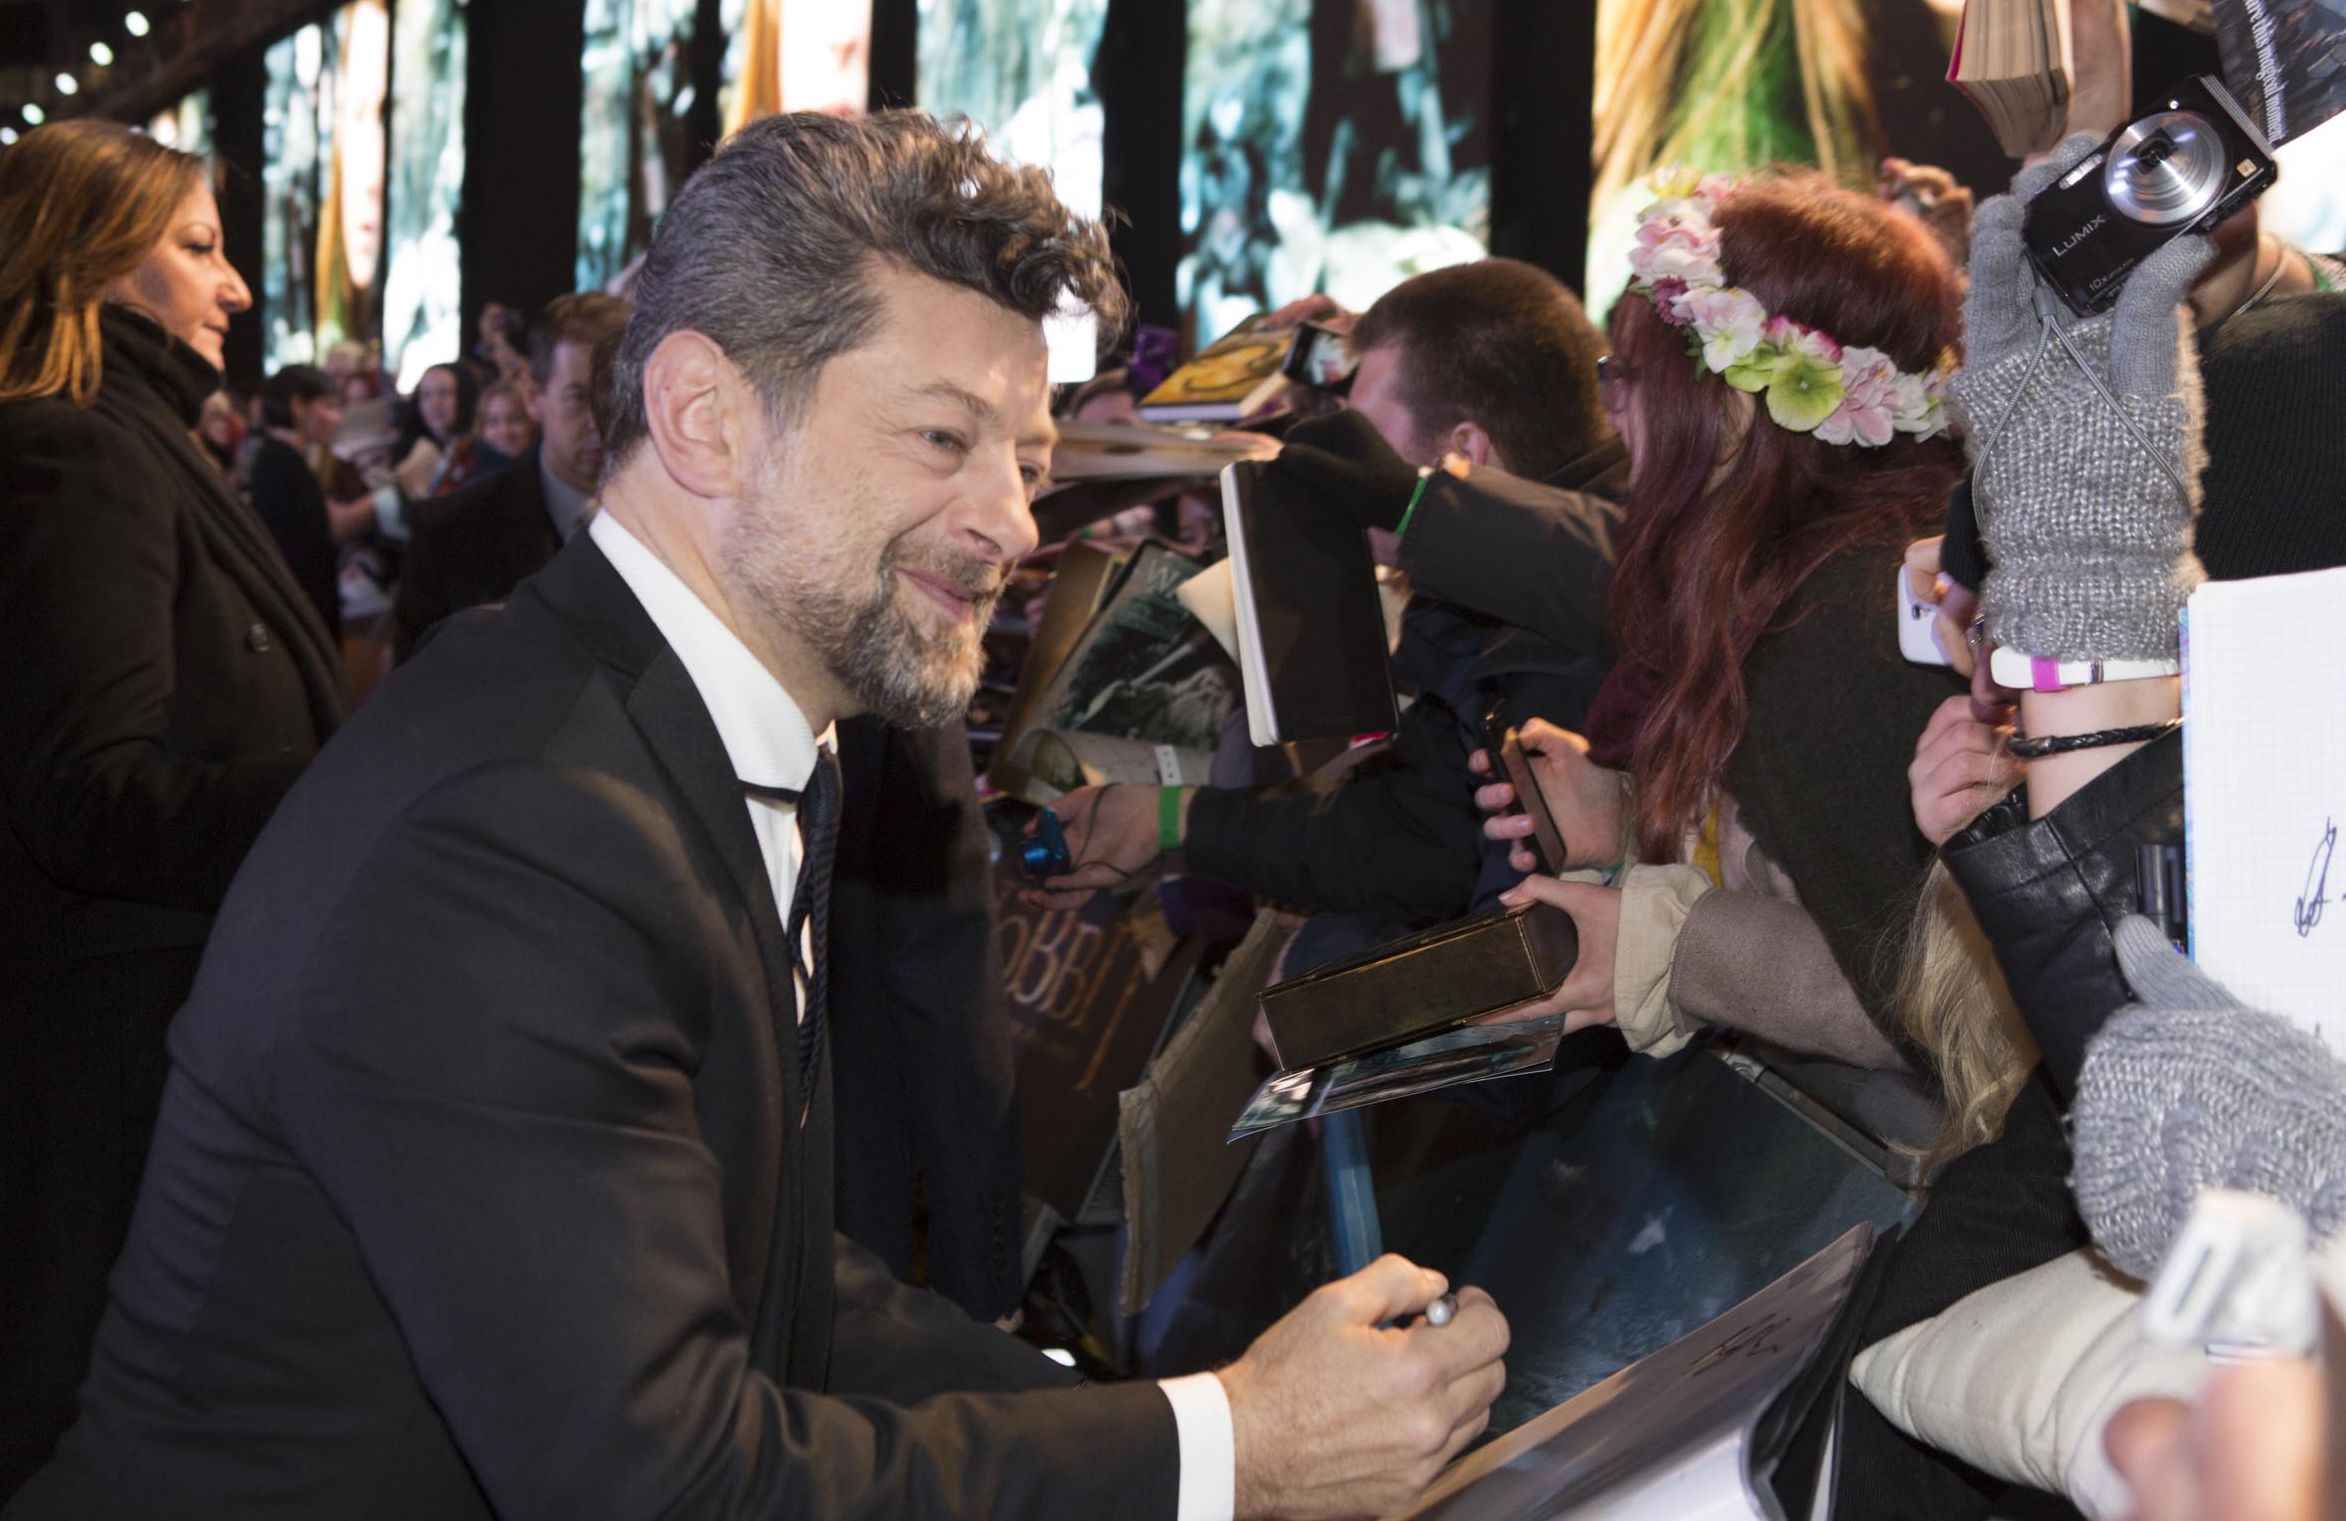 Andy Serkis at The Hobbit: The Battle of the Five Armies premiere